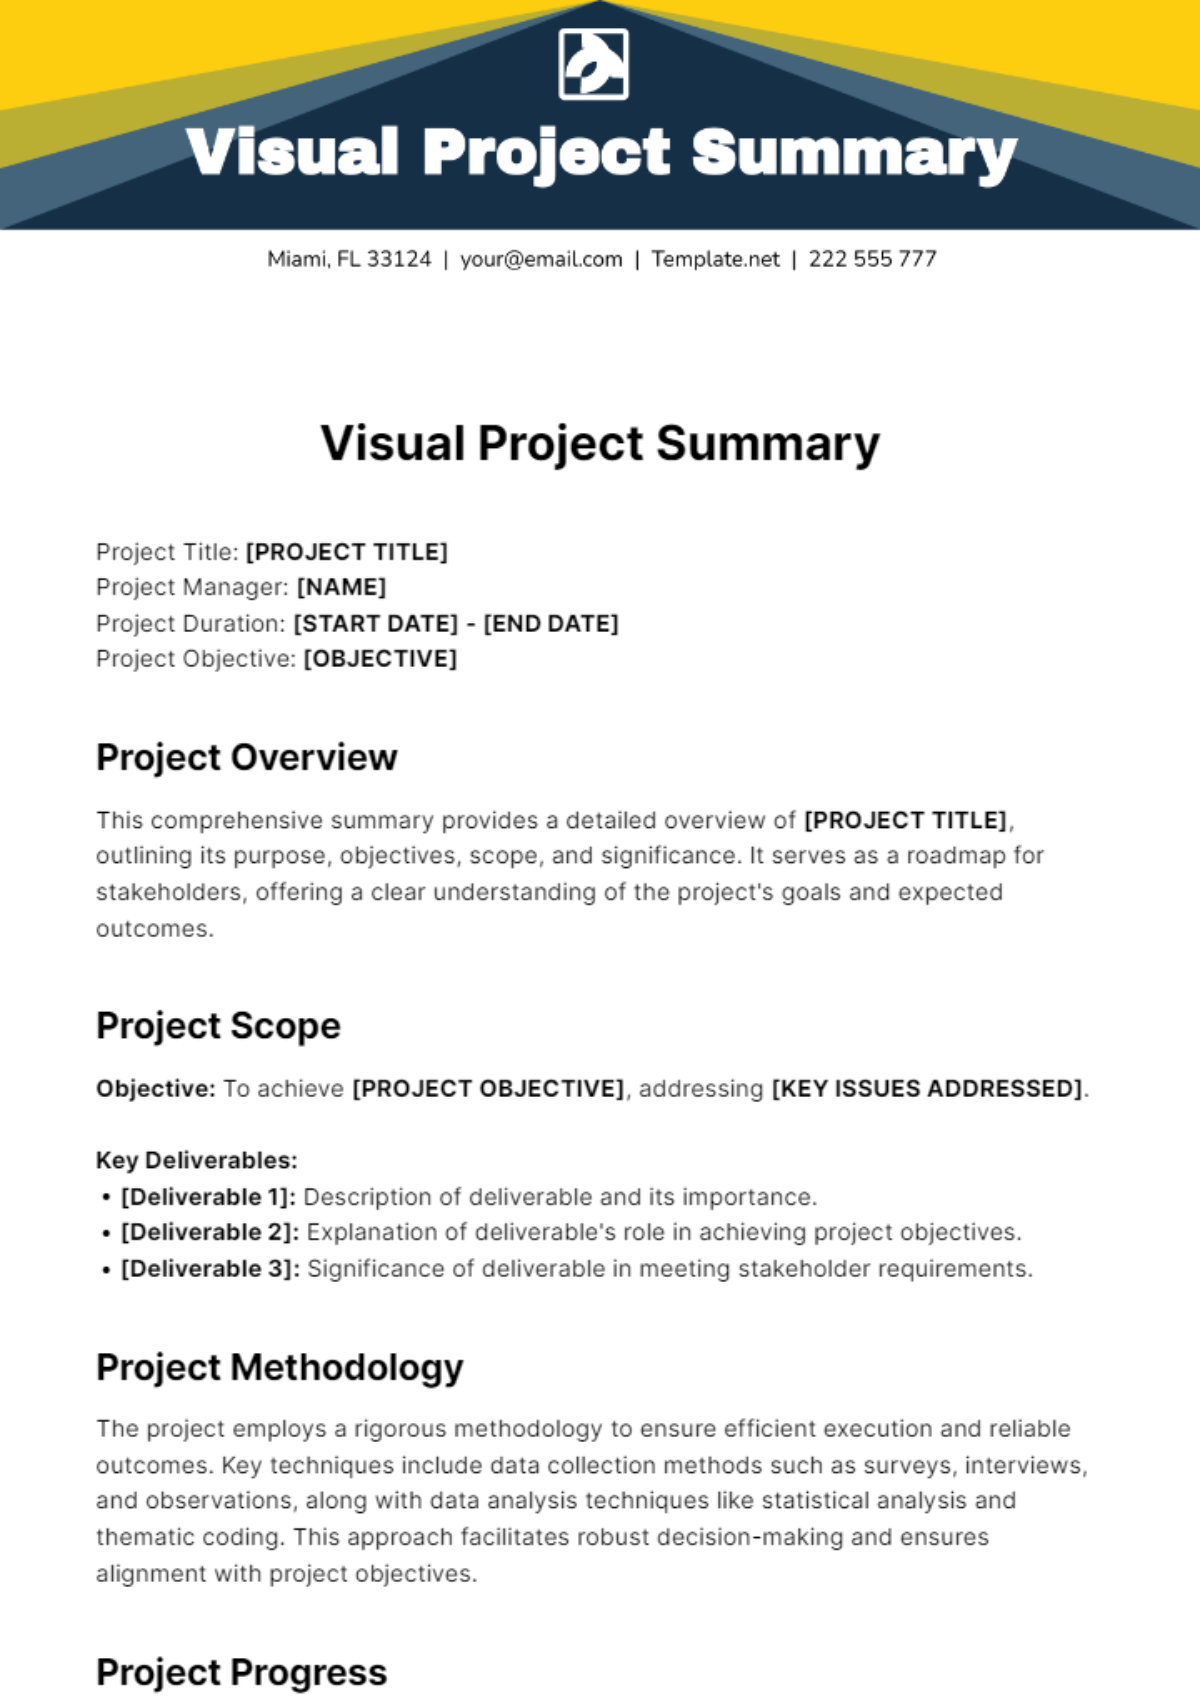 Visual Project Summary Template